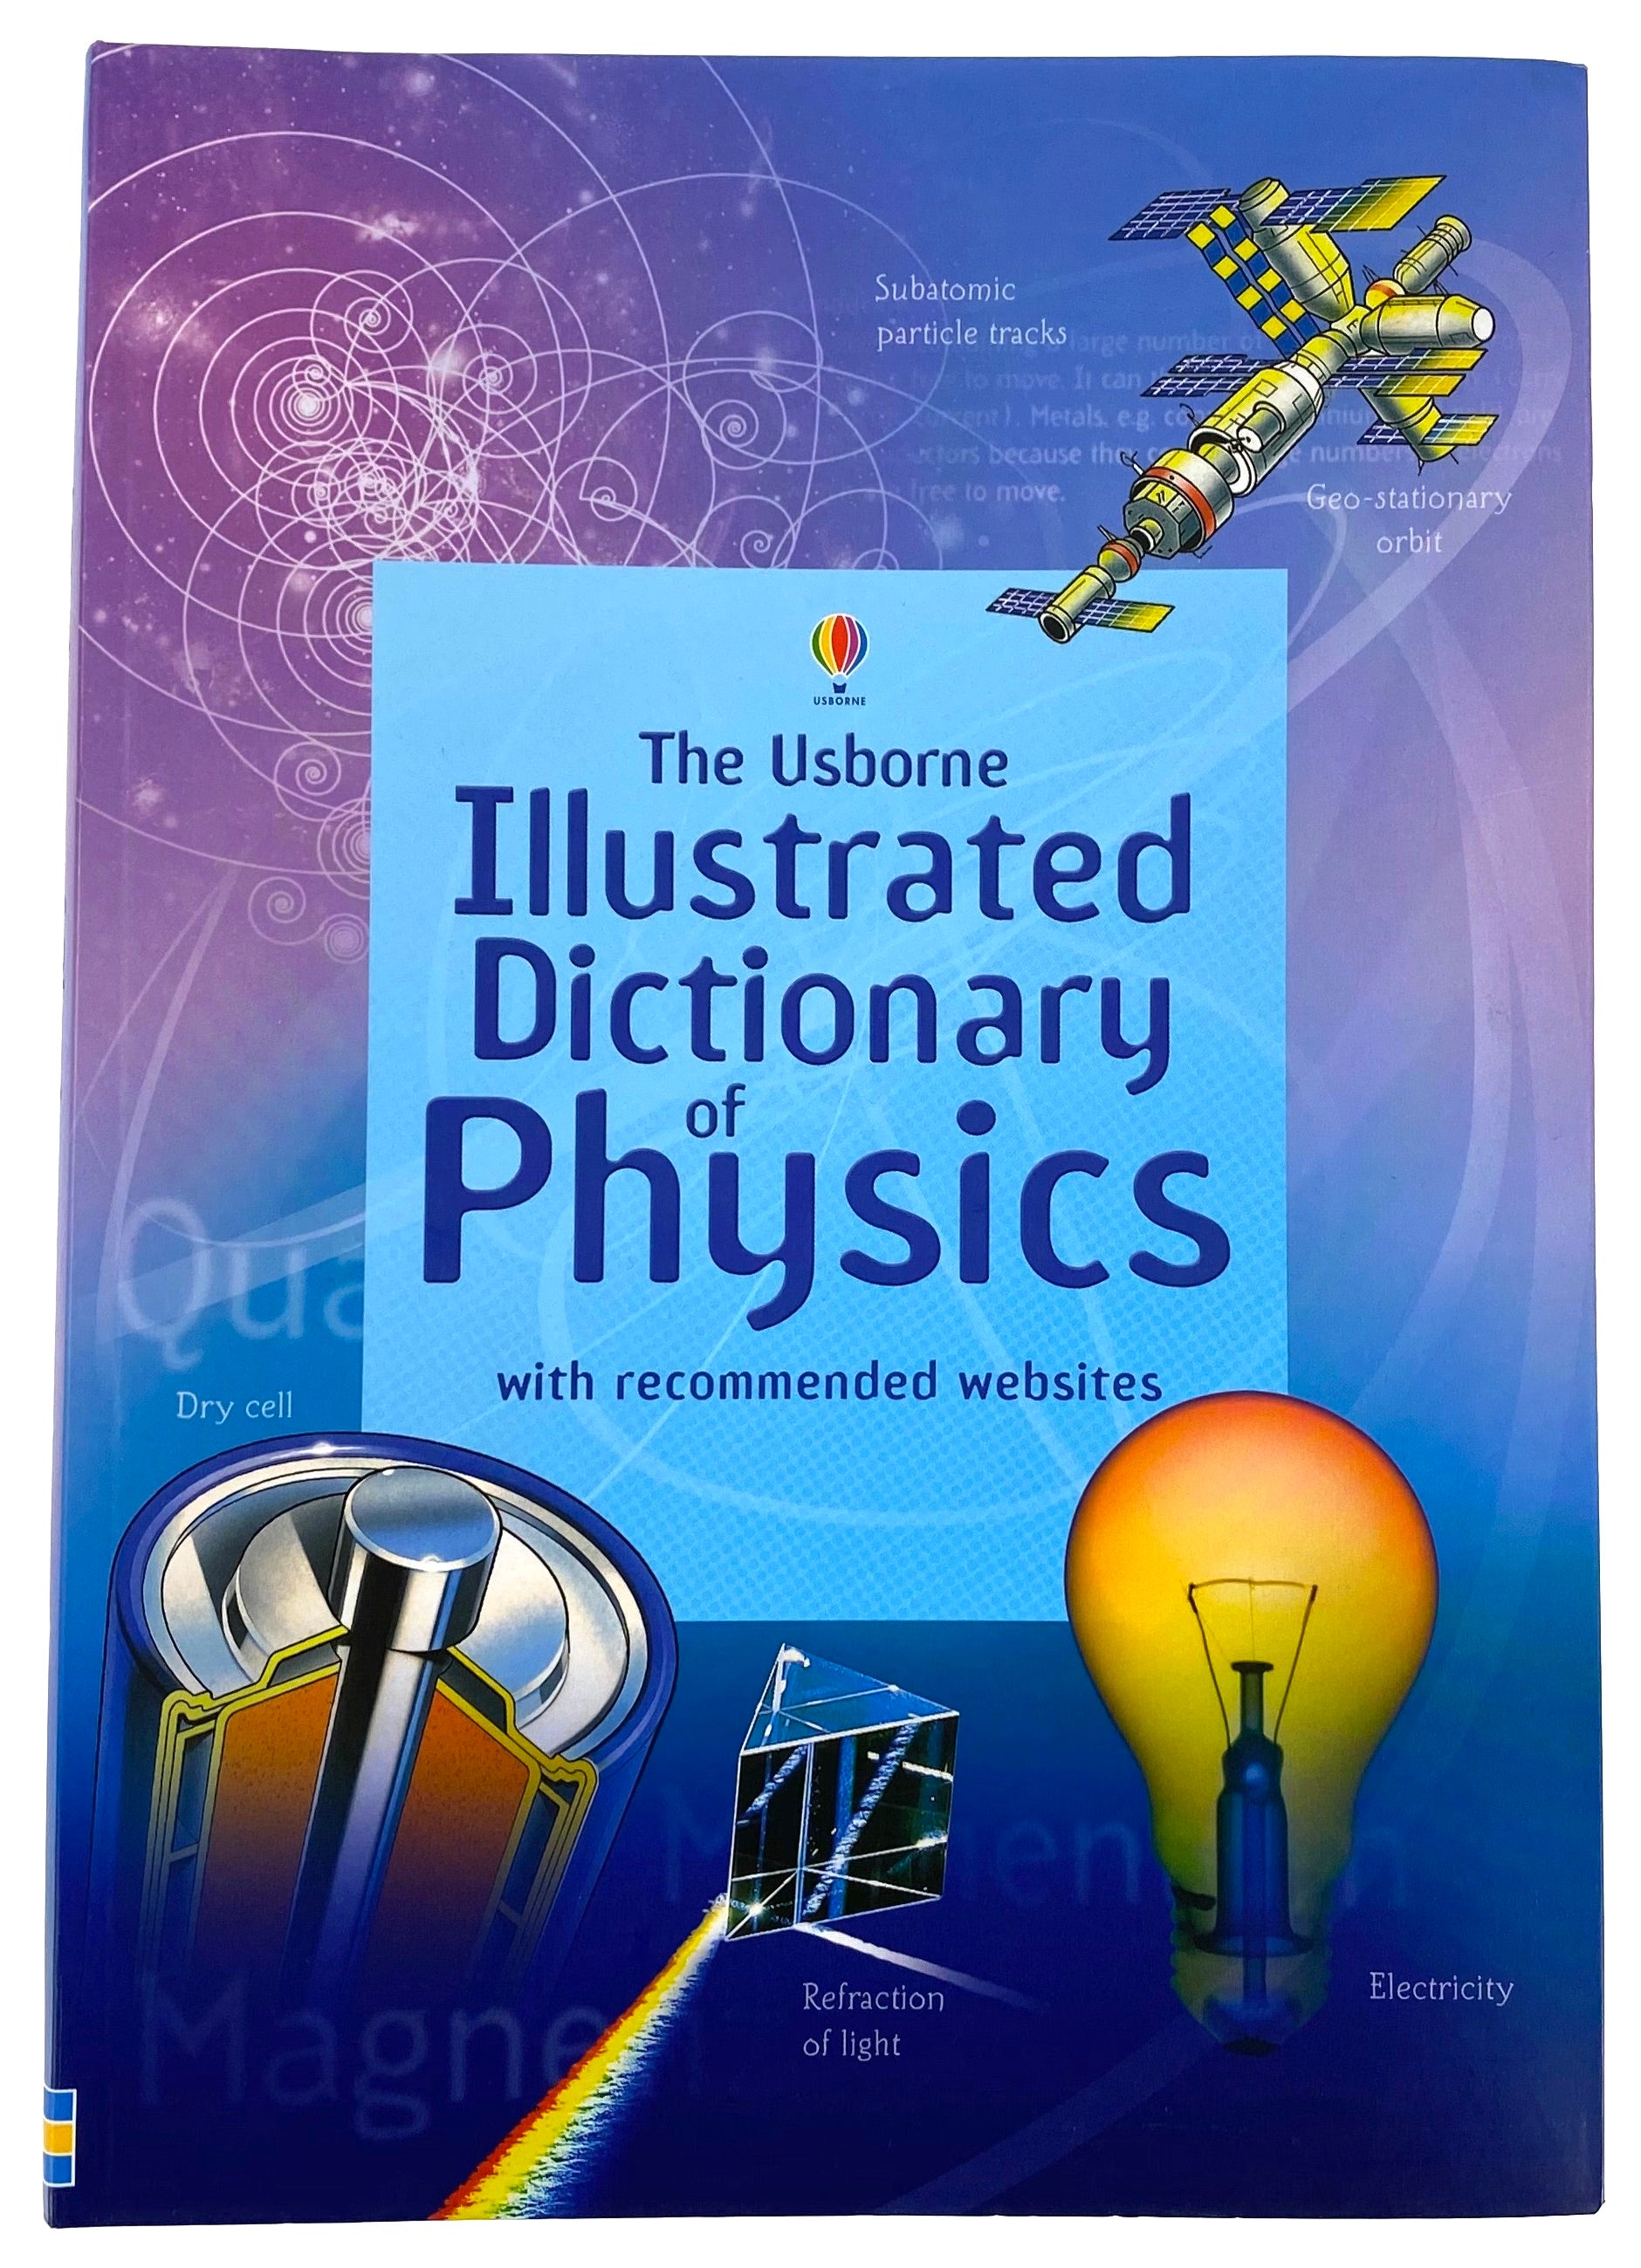 The  Illustrated Dictionary of Physics    